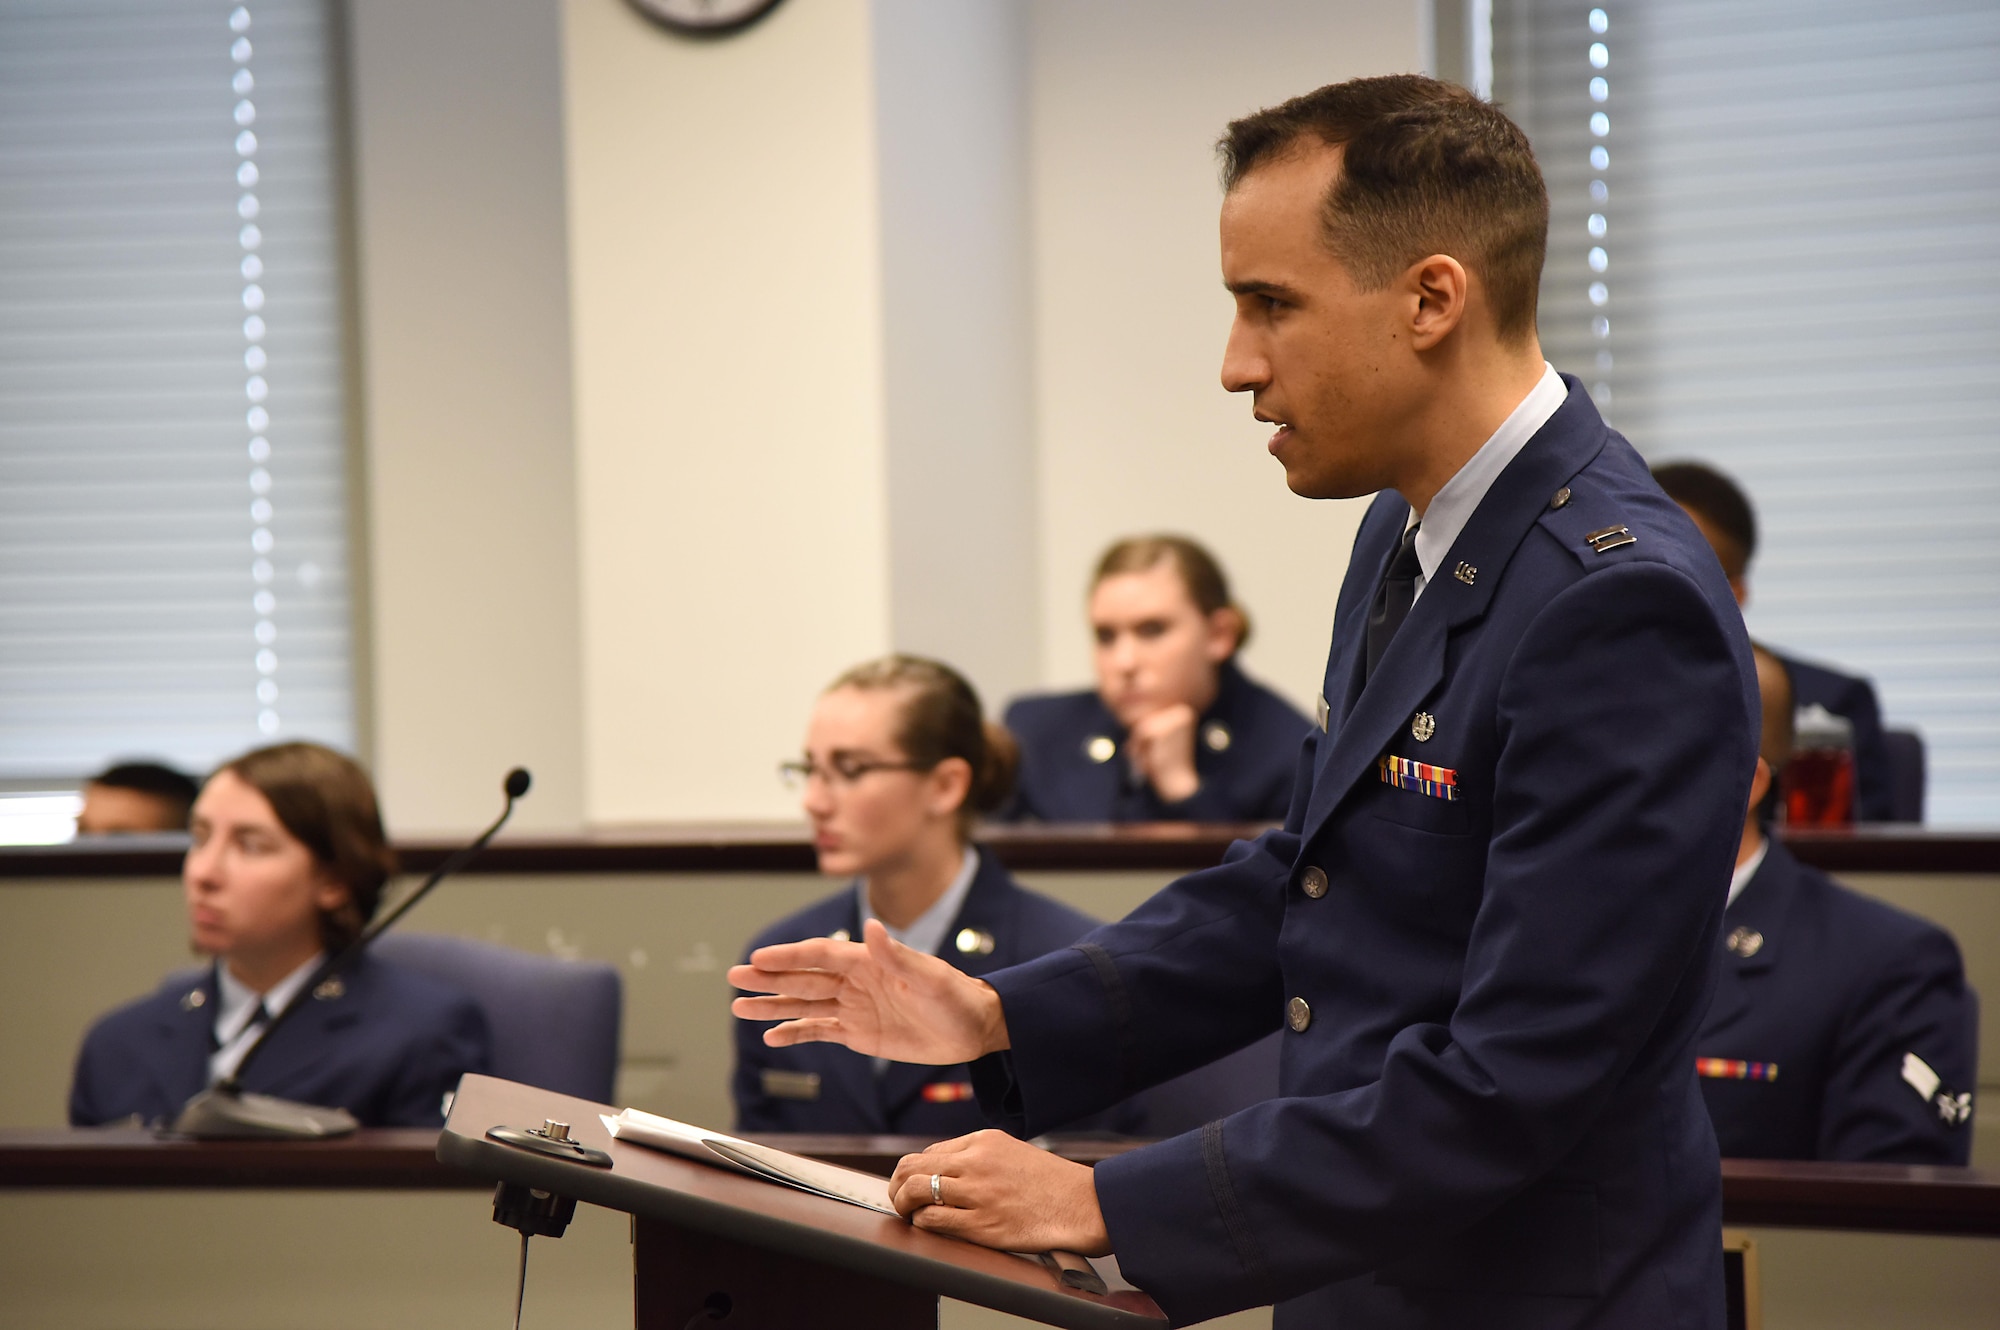 Capt. Victor Regal, Air Force Legal Operations Agency area defense counsel, questions the “accused” during a mock sexual assault trial held by the 81st Training Wing Legal Office at the Sablich Center March 3, 2017, on Keesler Air Force Base, Miss. The more than 30 Airmen, who served as jurors during the mock trial, were able to learn about military justice system. (U.S. Air Force photo by Kemberly Groue)